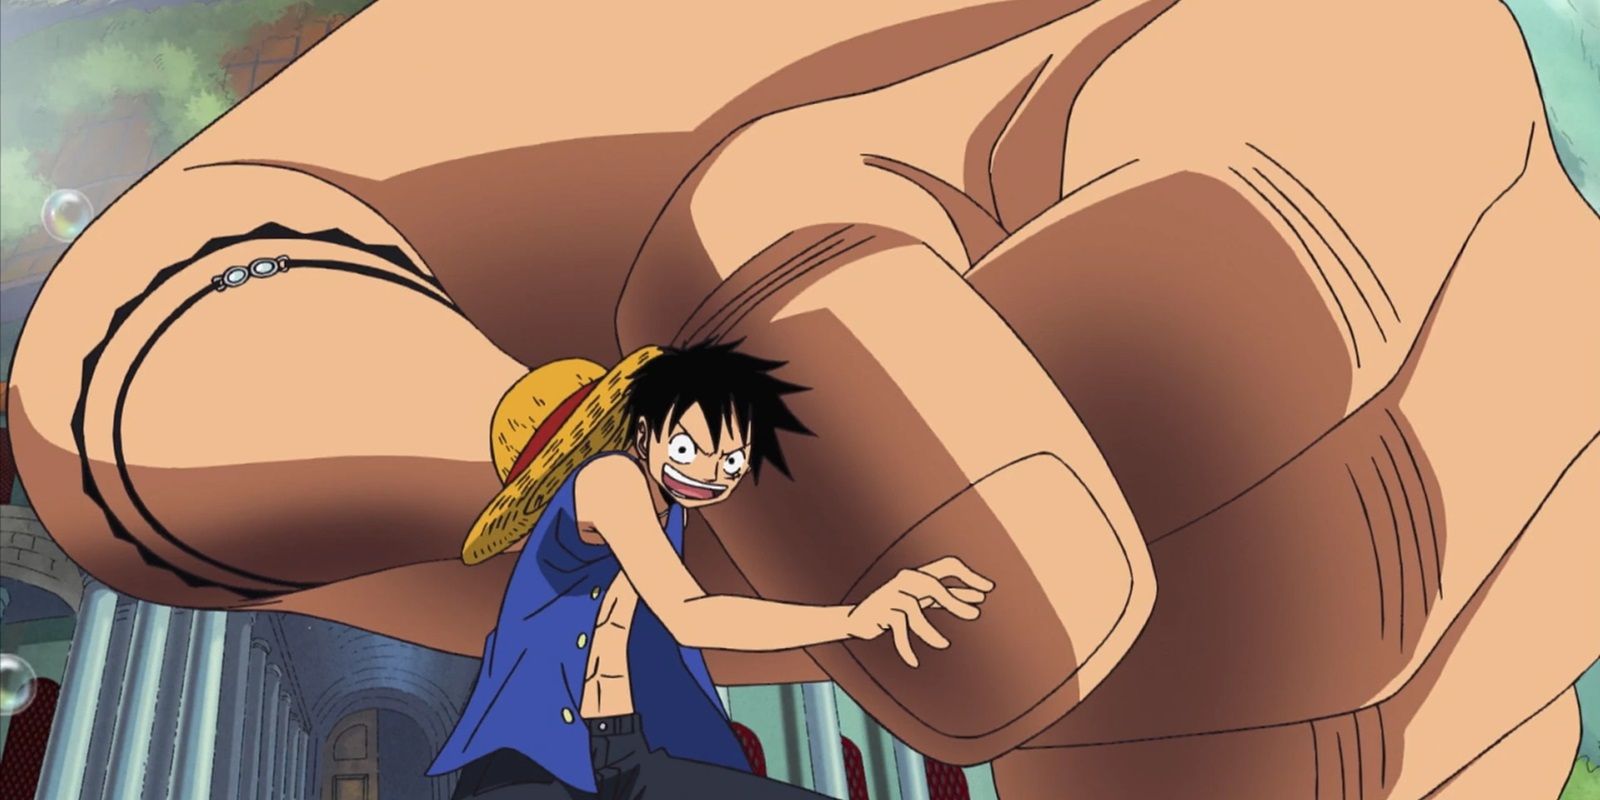 One Piece: Monkey D. Luffy prepares to attack with a massive arm using Gear 3 technique 